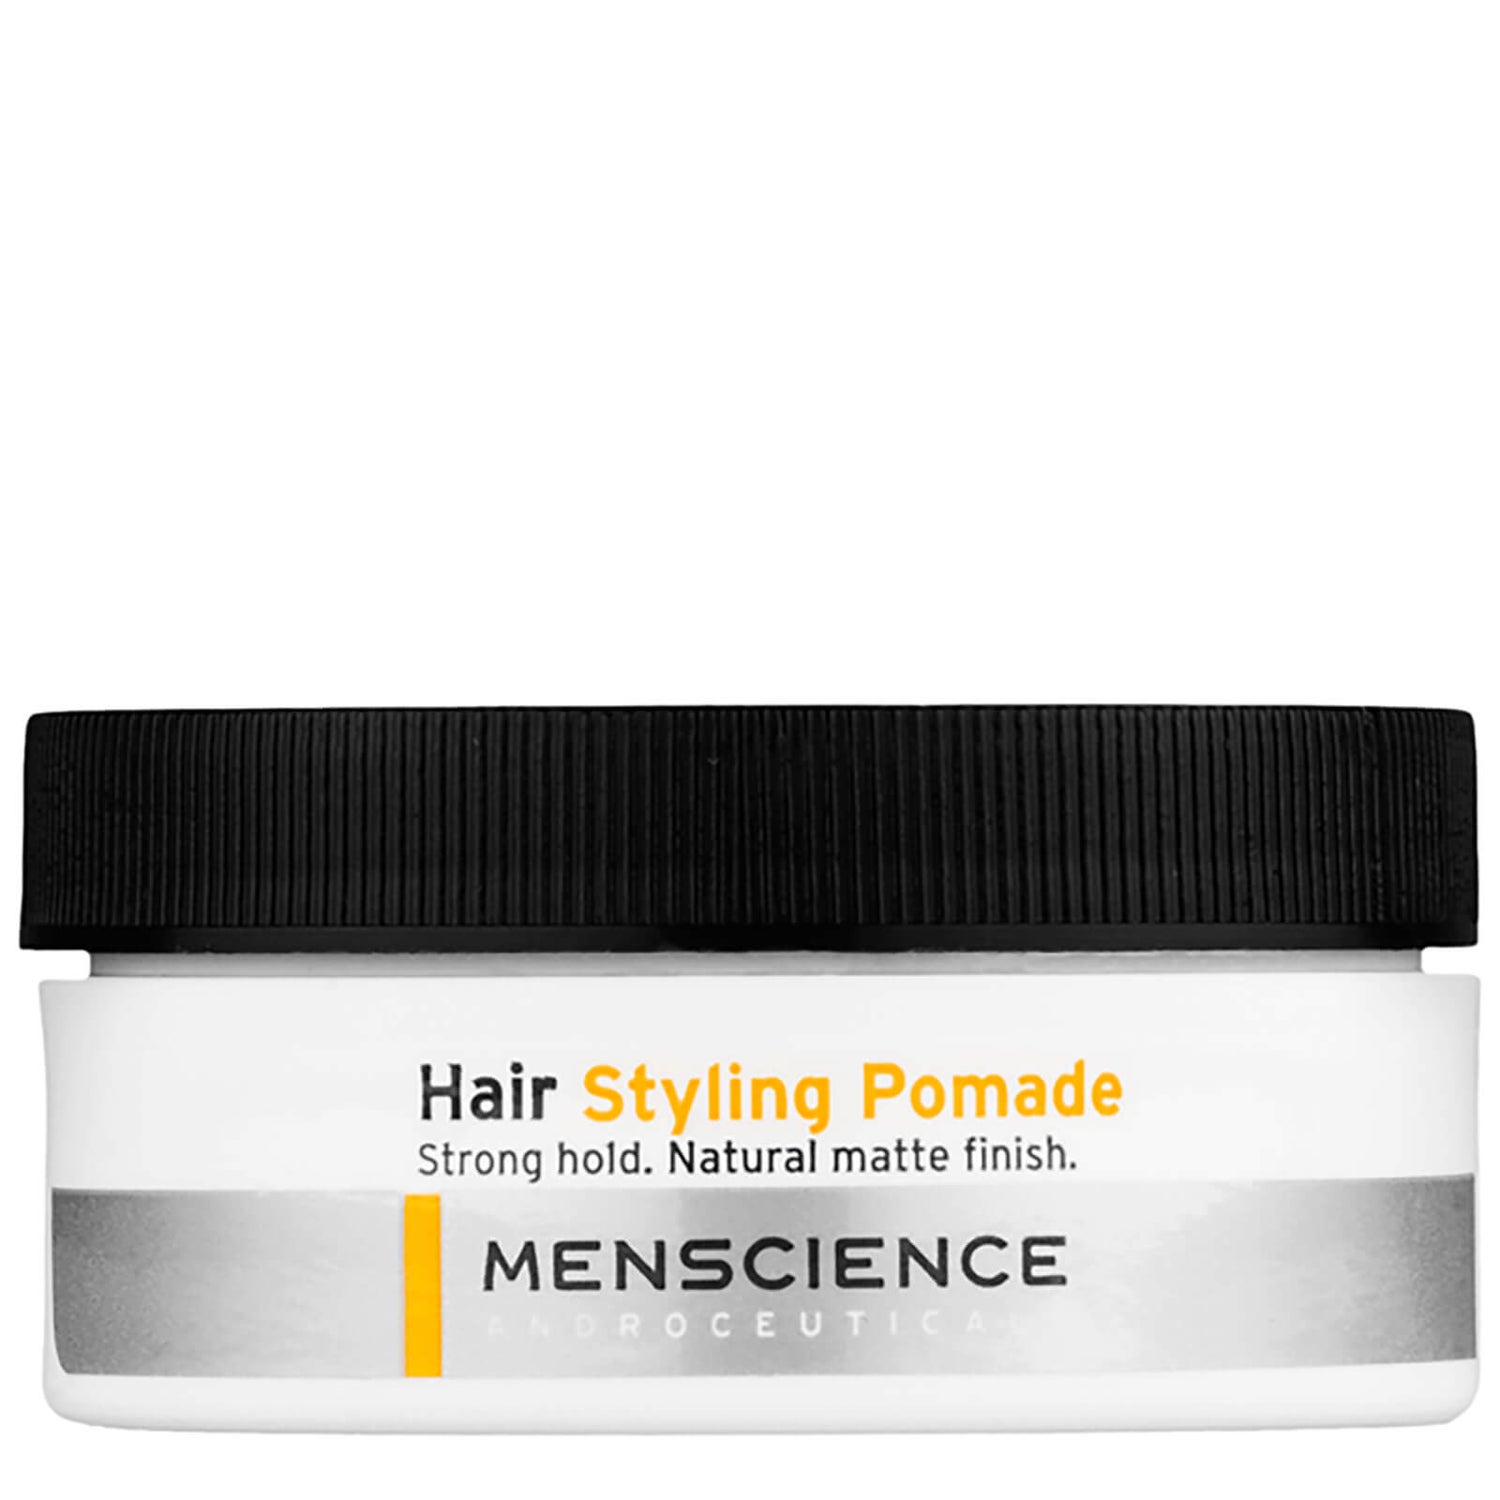 Menscience Hair Styling Pomade (2 oz.)